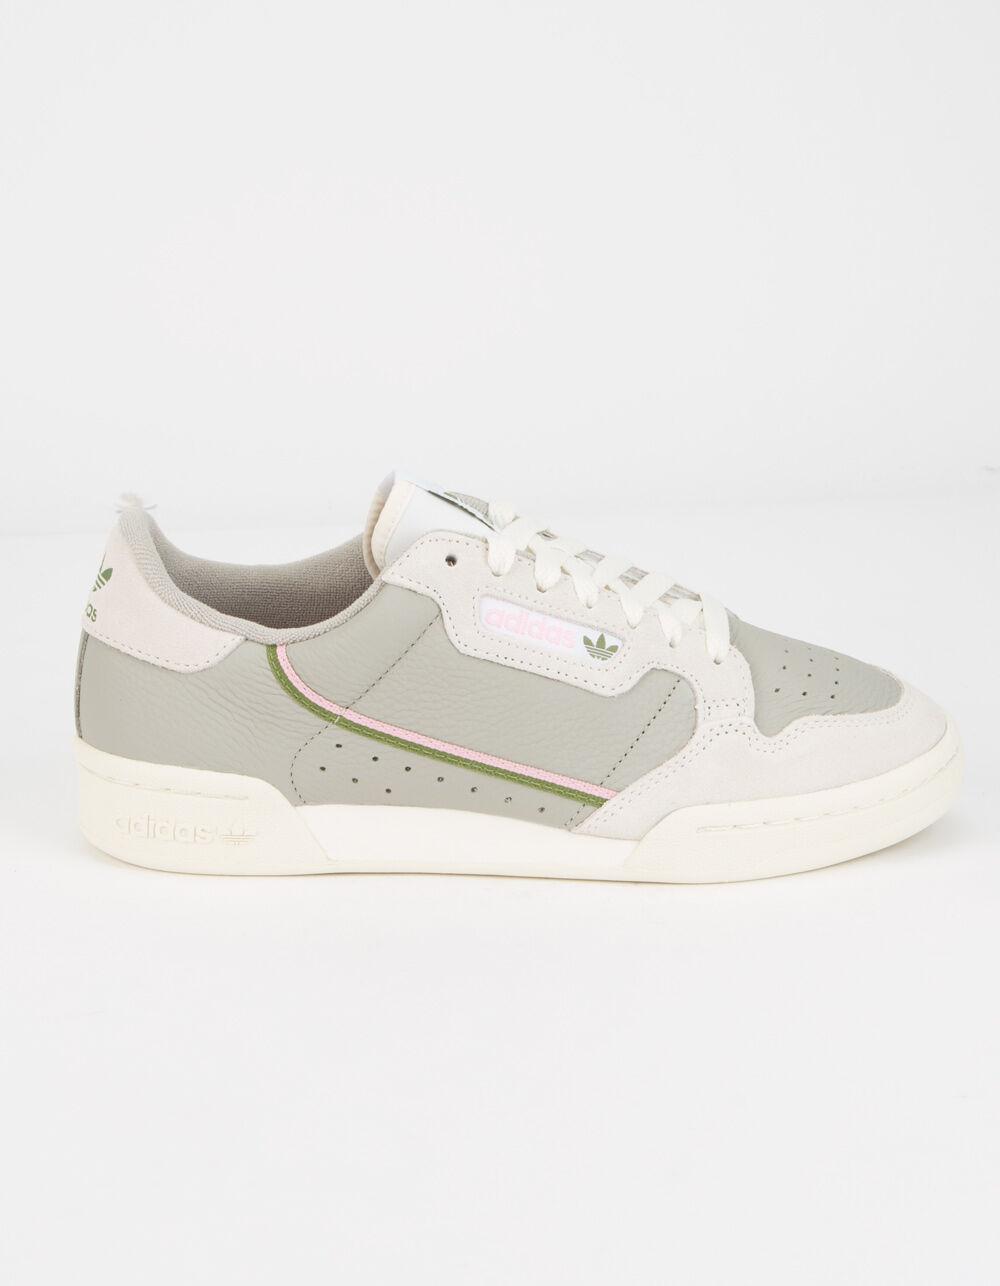 adidas Leather Continental 80 Sesame & Raw White Womens ...